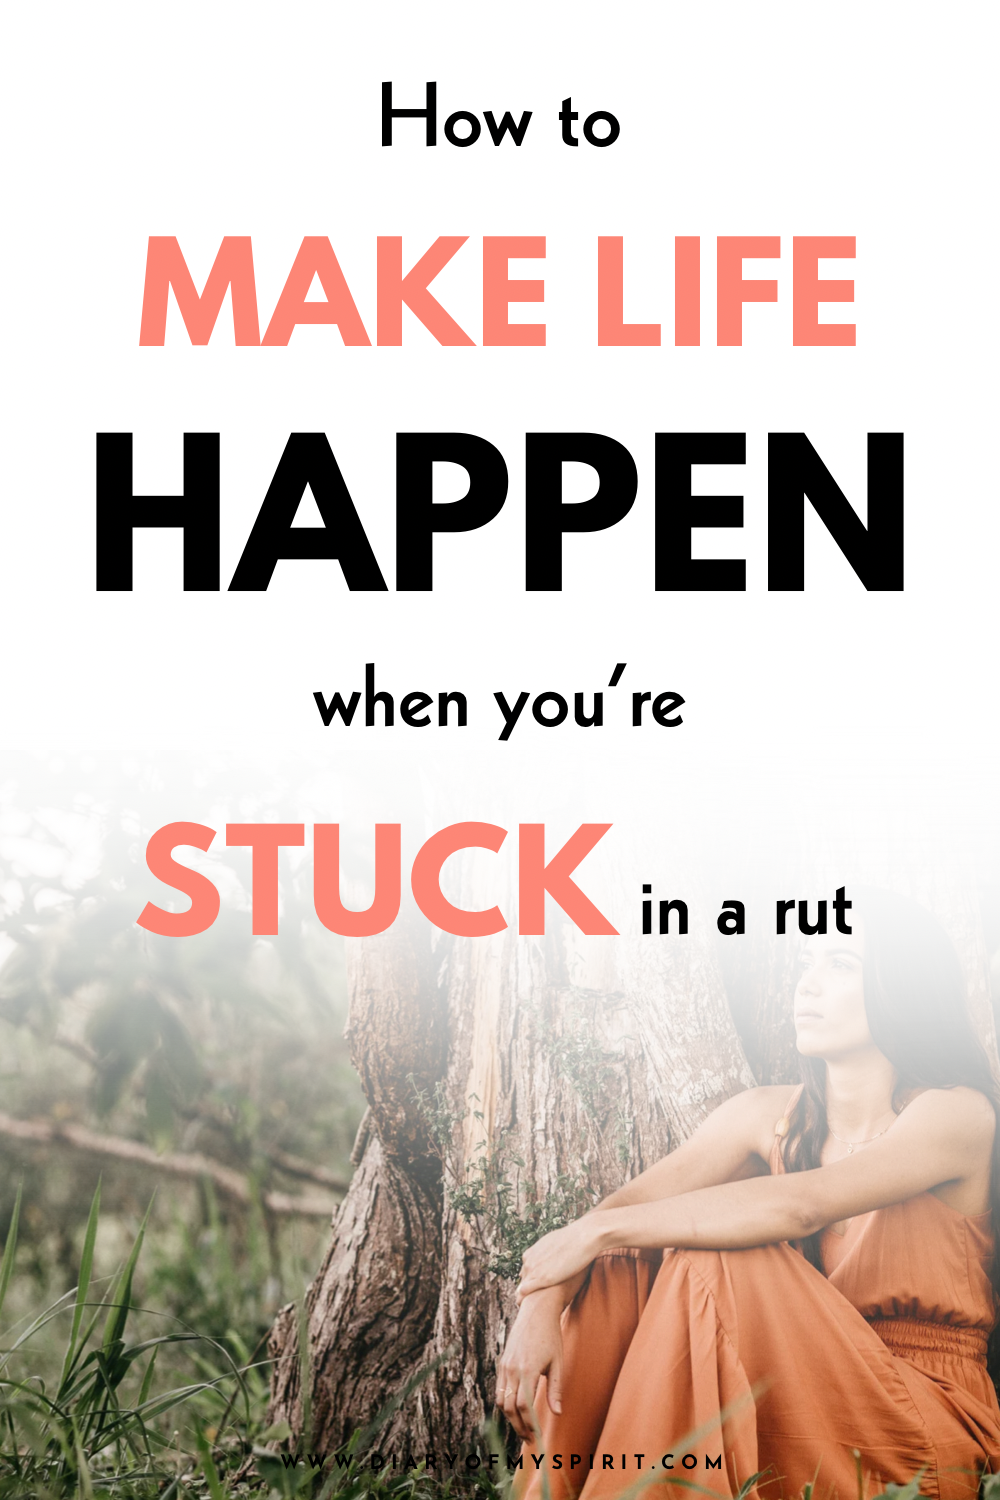 i feel stuck in life. getting unstuck. how to move forward when stuck in a rut. feeling stuck. How to get out of a funk. feeling trapped. being stuck. I am stuck